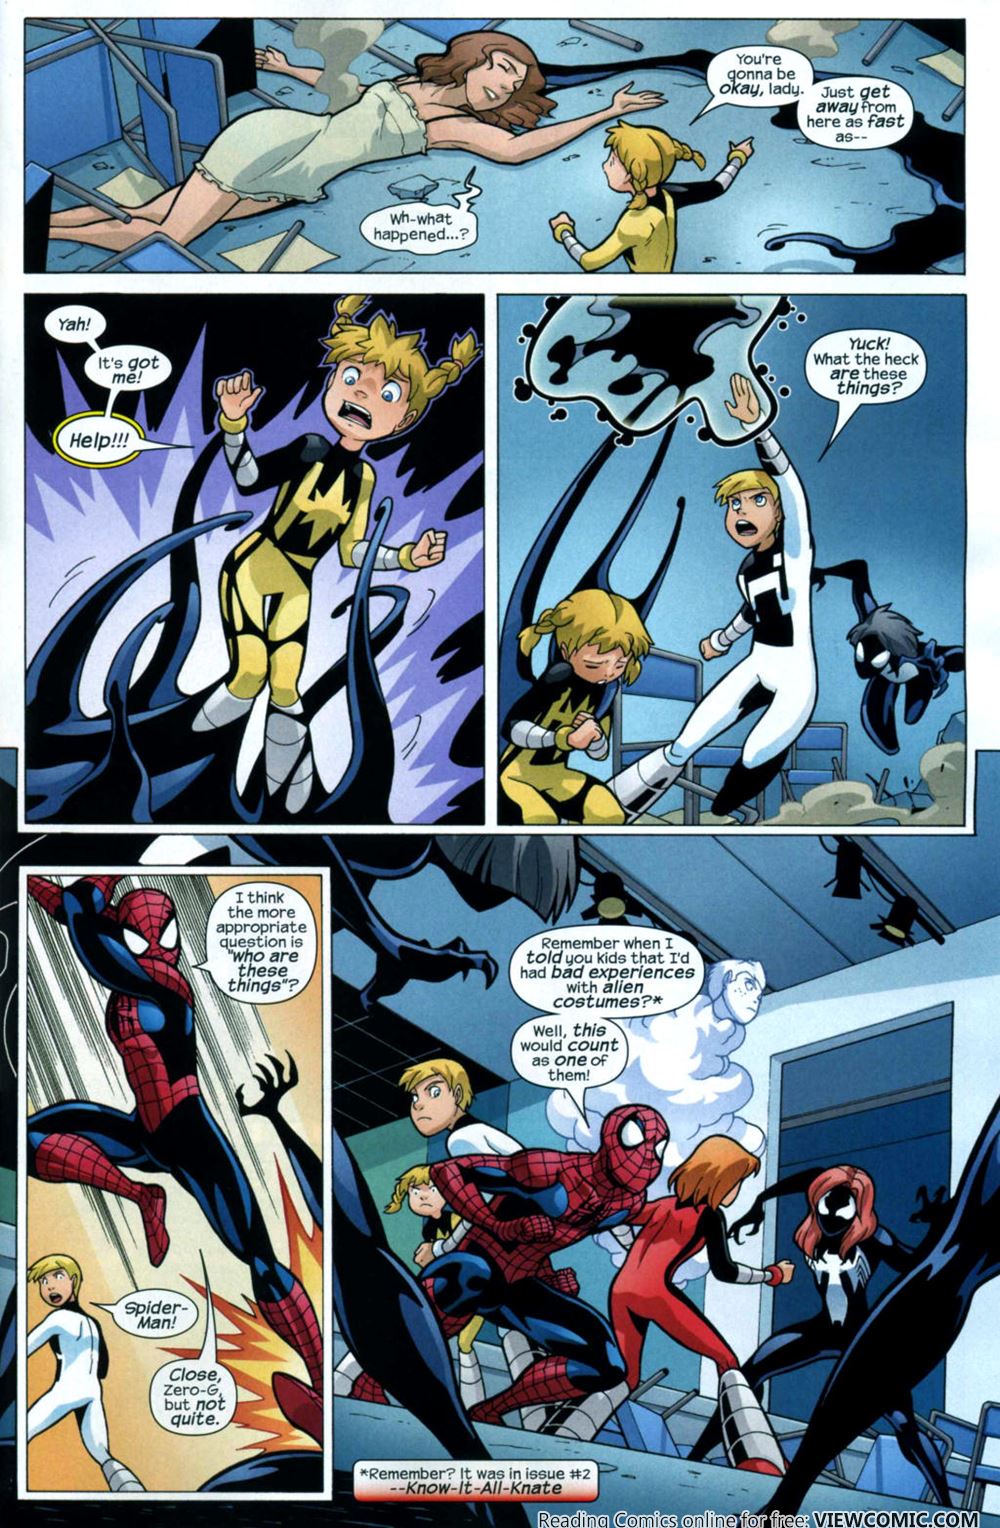 Spider Man And Power Pack 03 Of 04 07 Viewcomic Reading Comics Online For Free 19